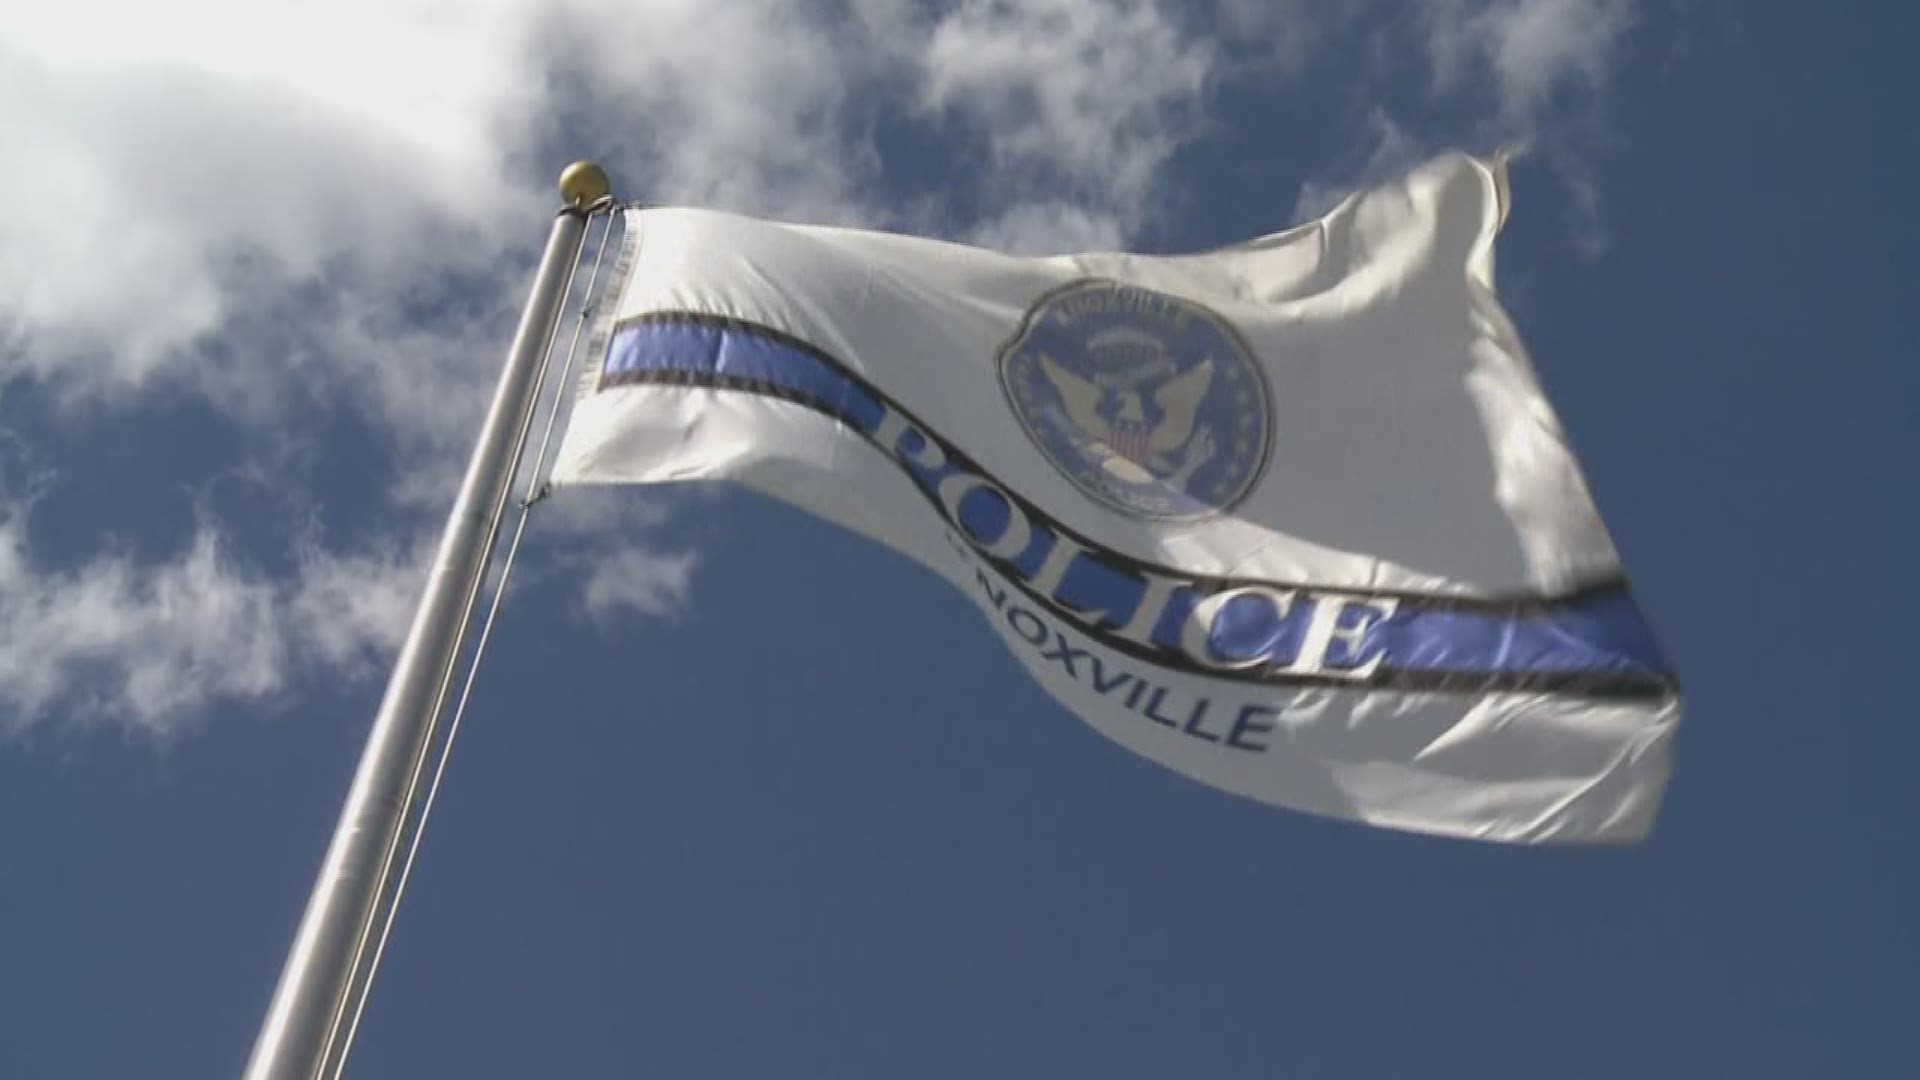 Law enforcement agencies across East Tennessee are searching for their next men and women in uniform. 10News reporter Leslie Ackerson joins us with details on a job fair happening today and the positions they are looking for.